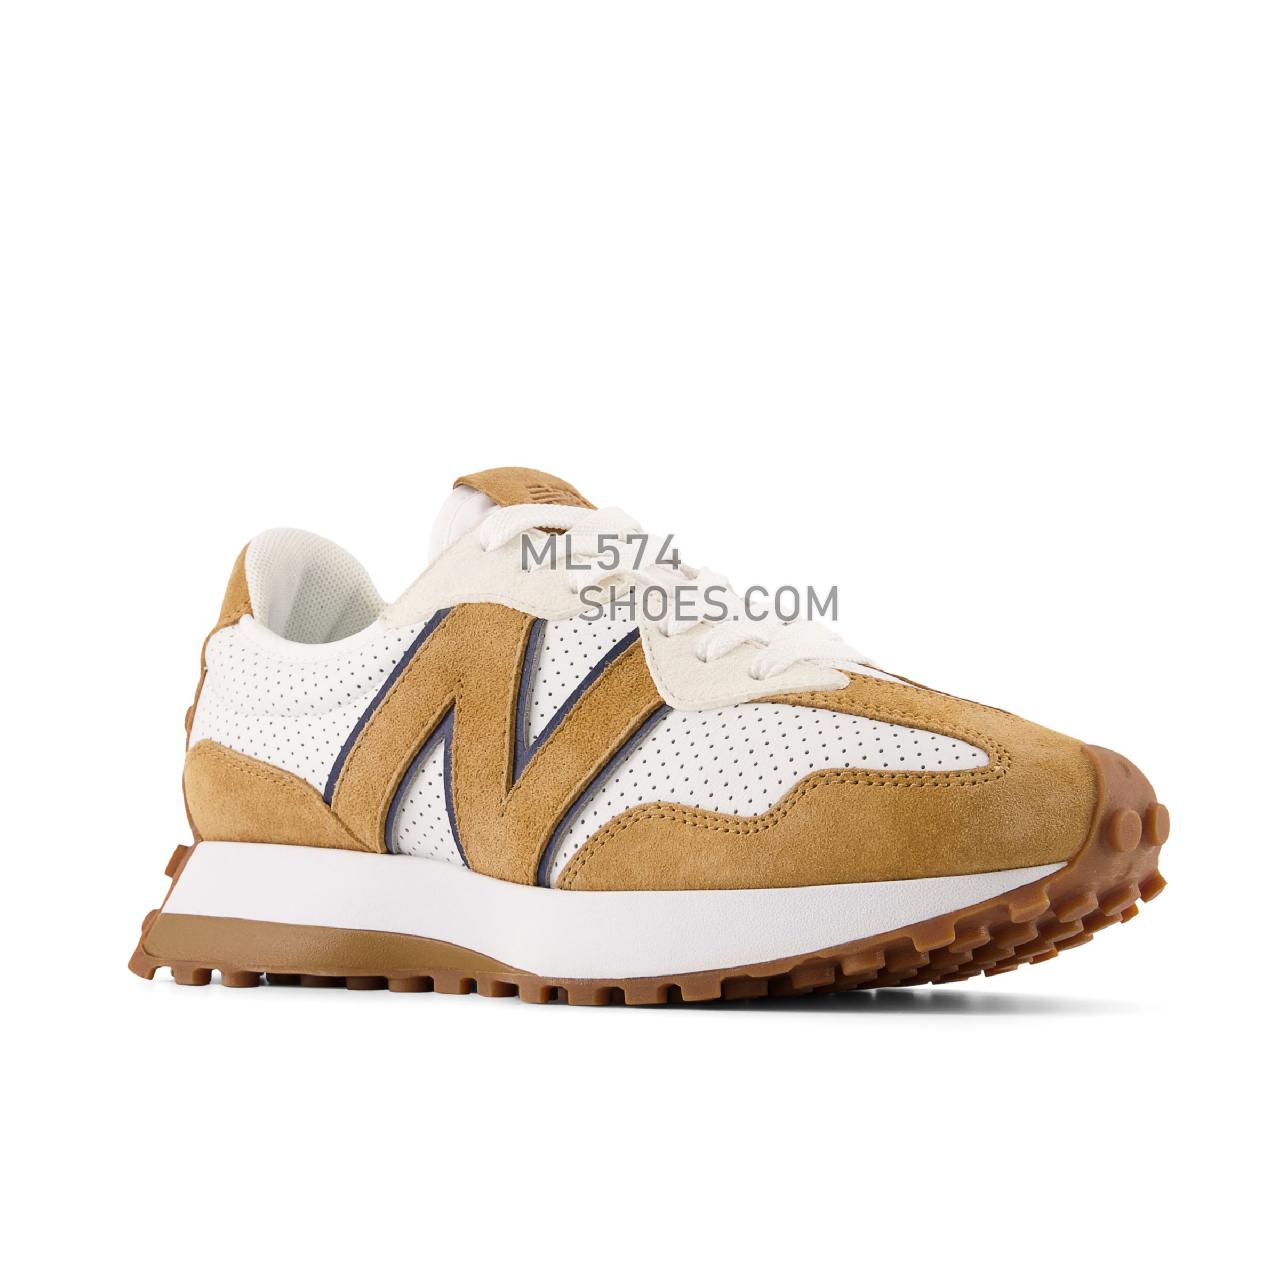 New Balance Bandier 327 - Women's Sport Style Sneakers - Nb White with Workwear and Natural Indigo - WS327QW